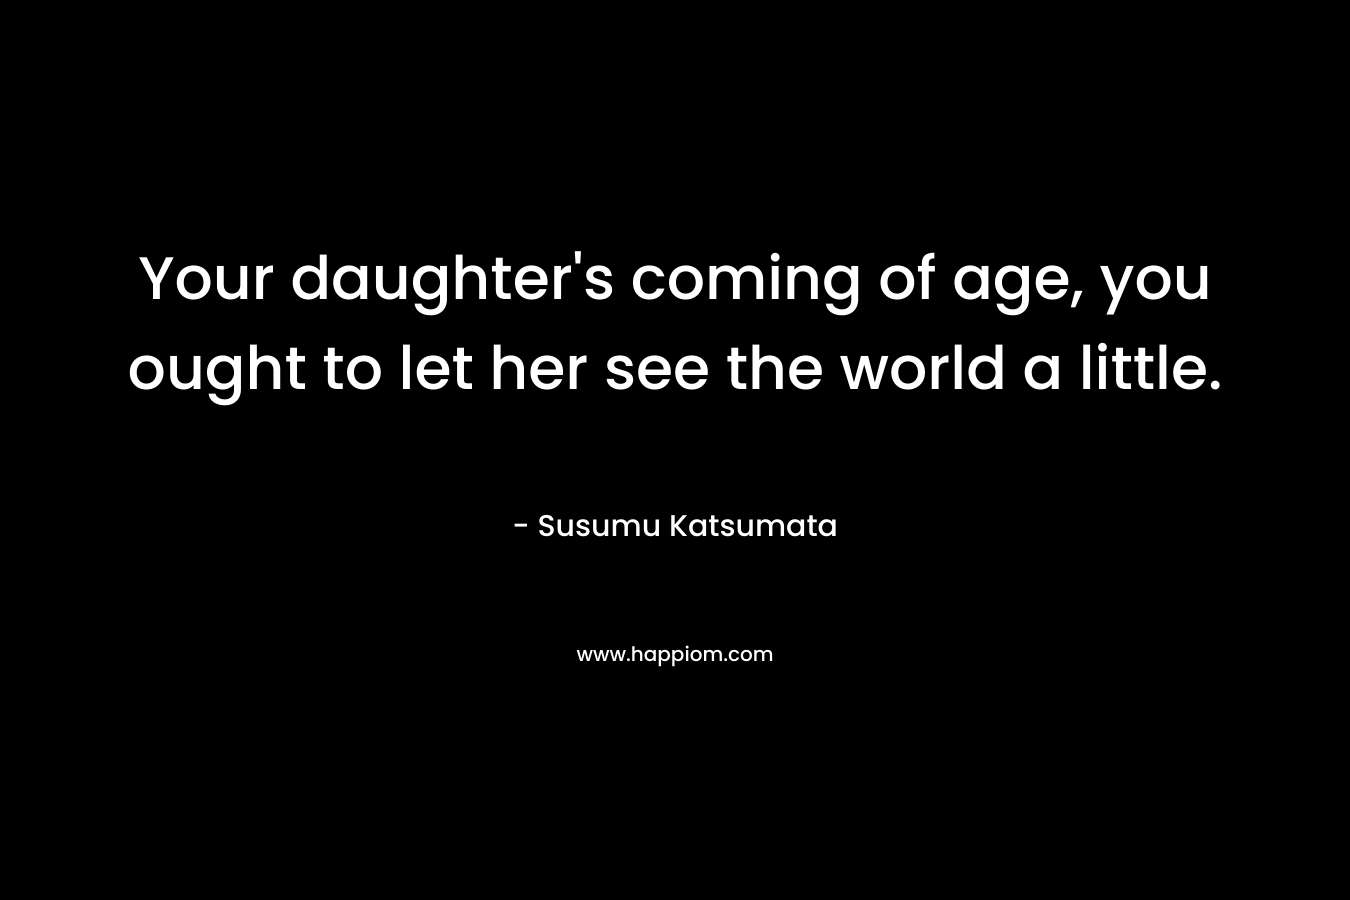 Your daughter’s coming of age, you ought to let her see the world a little. – Susumu Katsumata